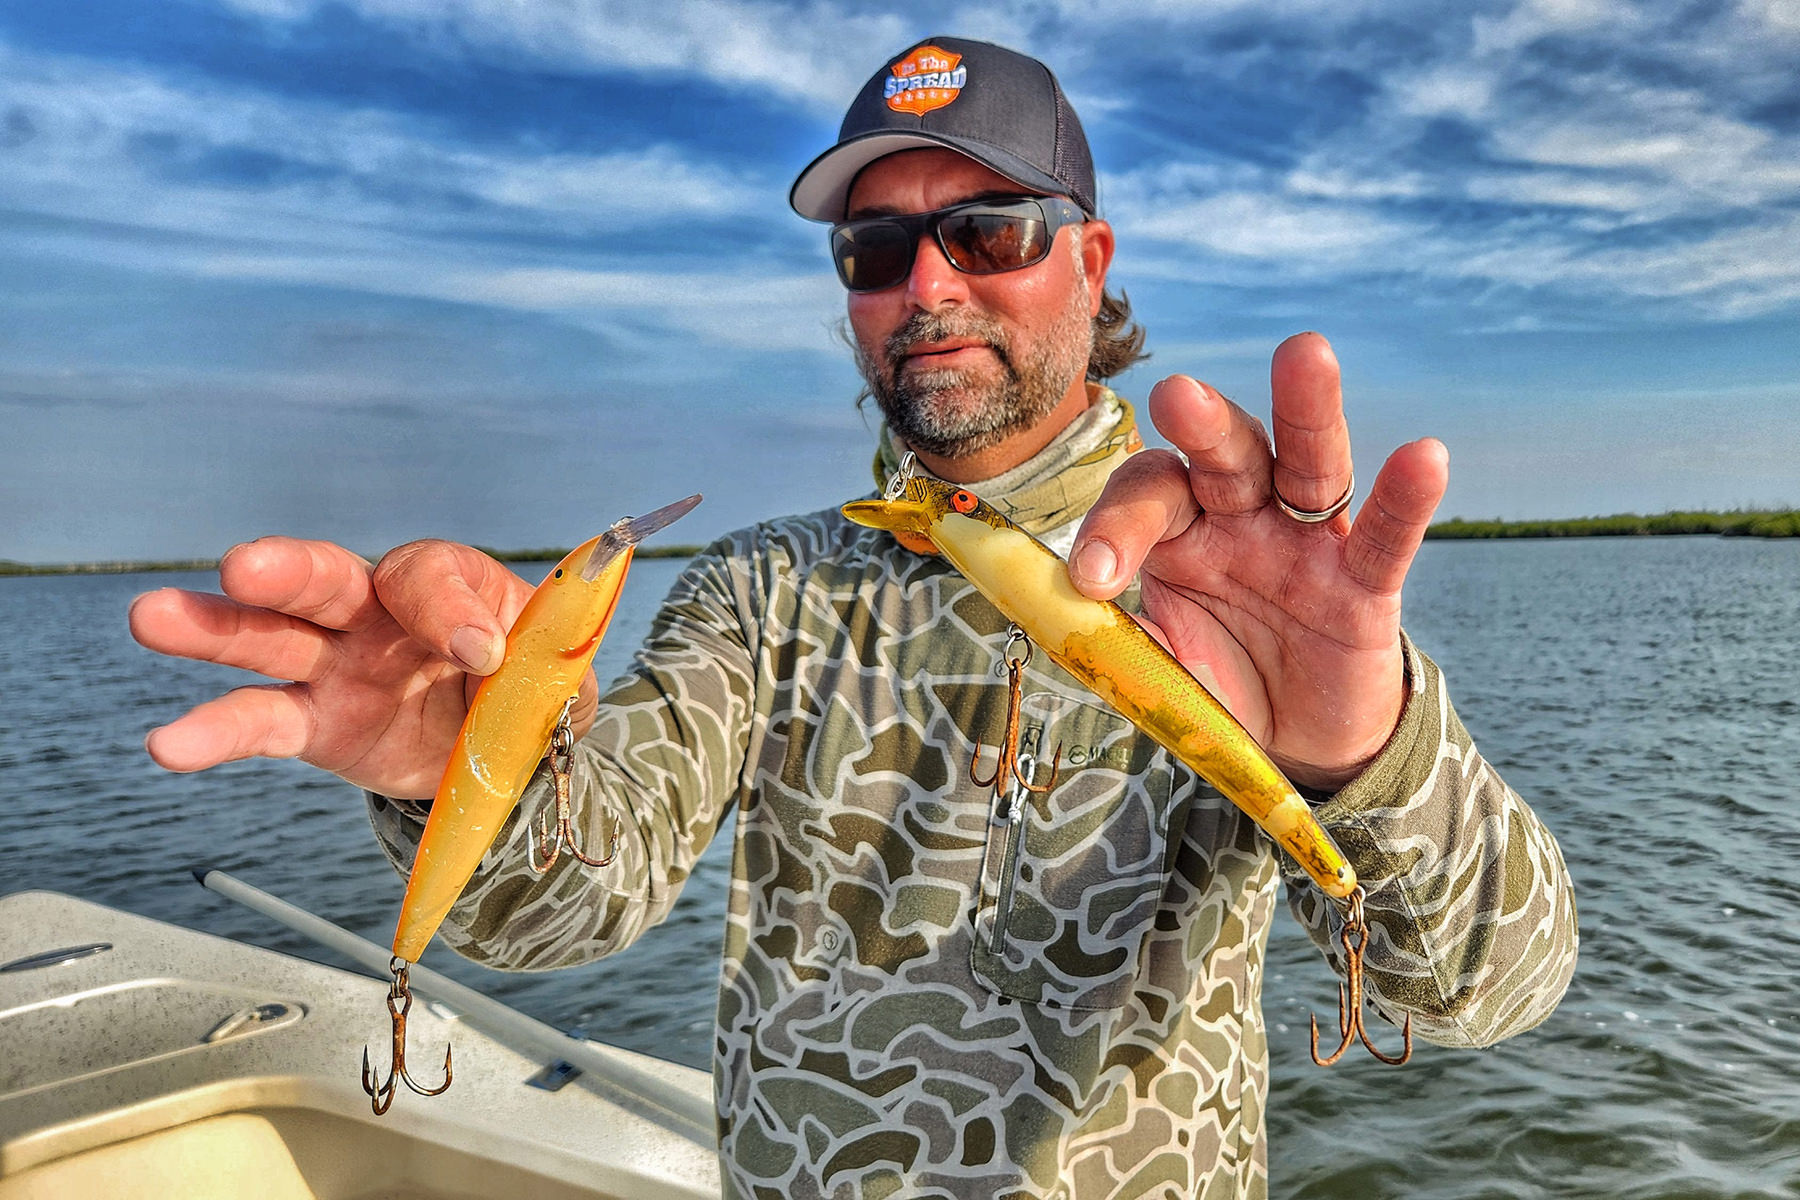 William Toney presents two of his favorite casting lures for grouper